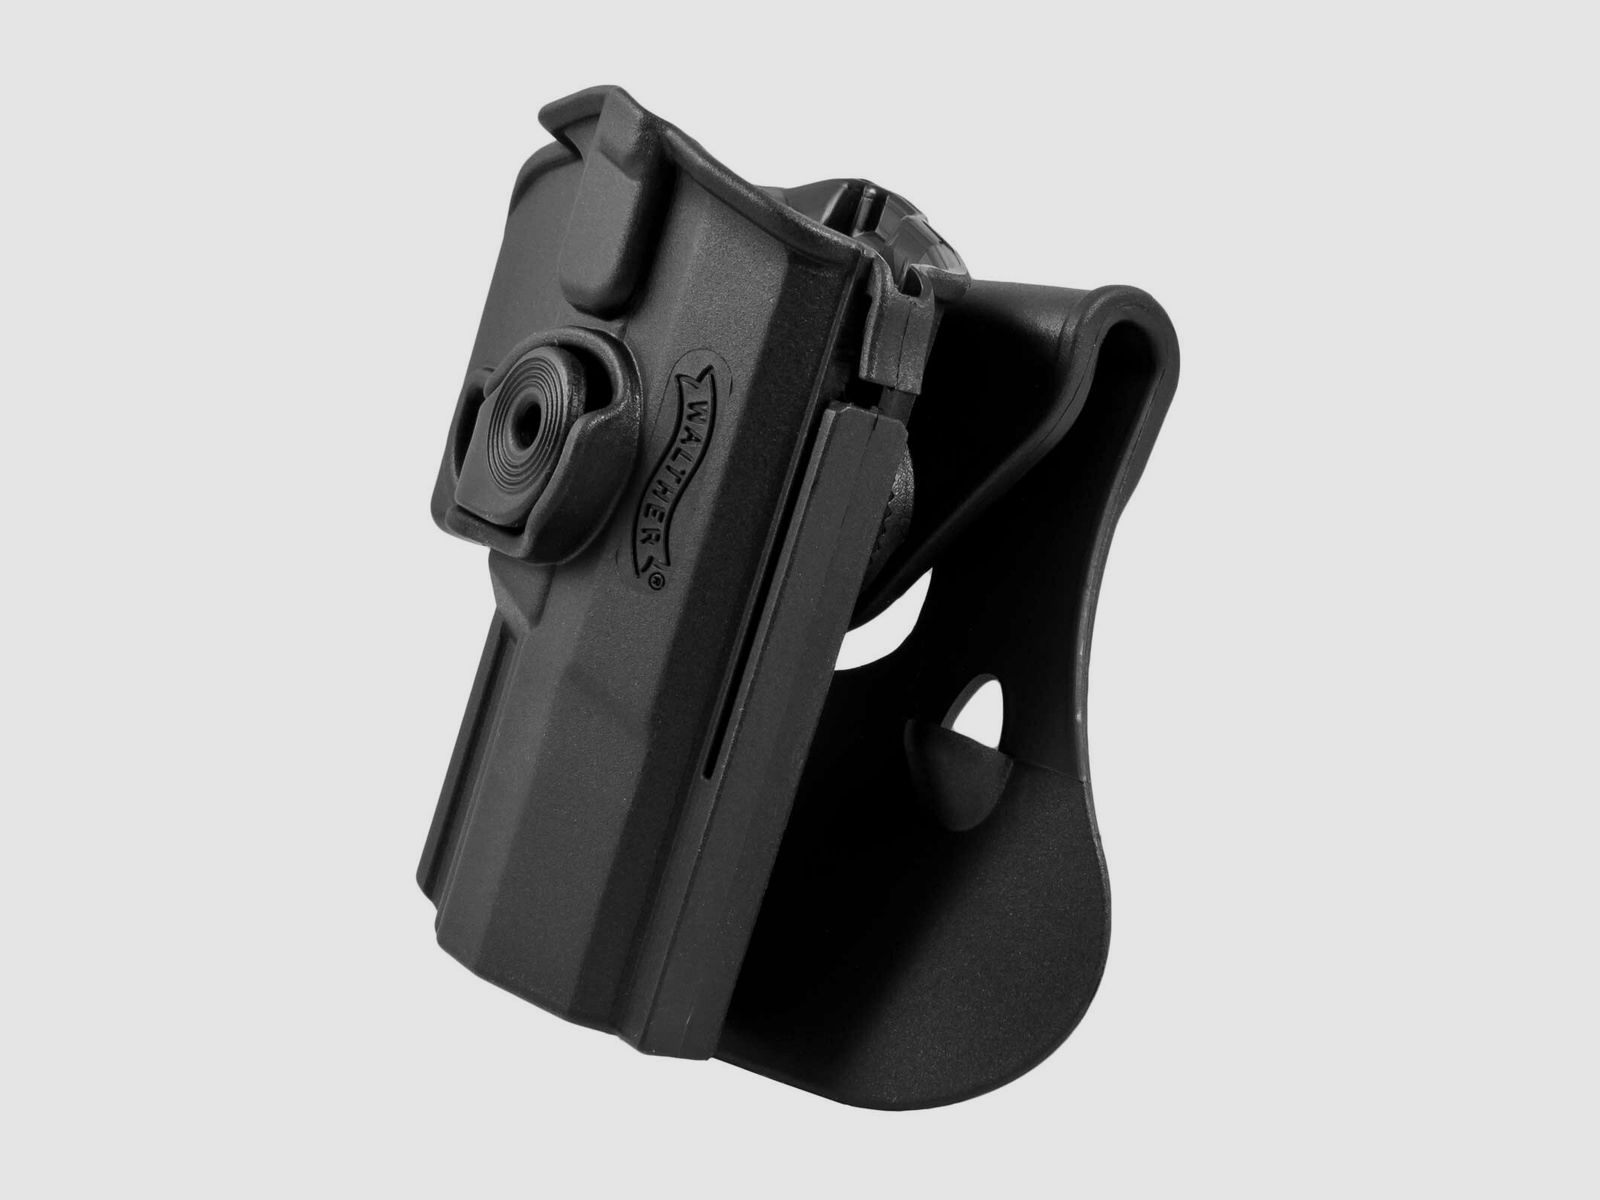 Walther Paddle Holster für Walther CP99 Compact (AC-5.8064) und PPQ (AC-5.8160)